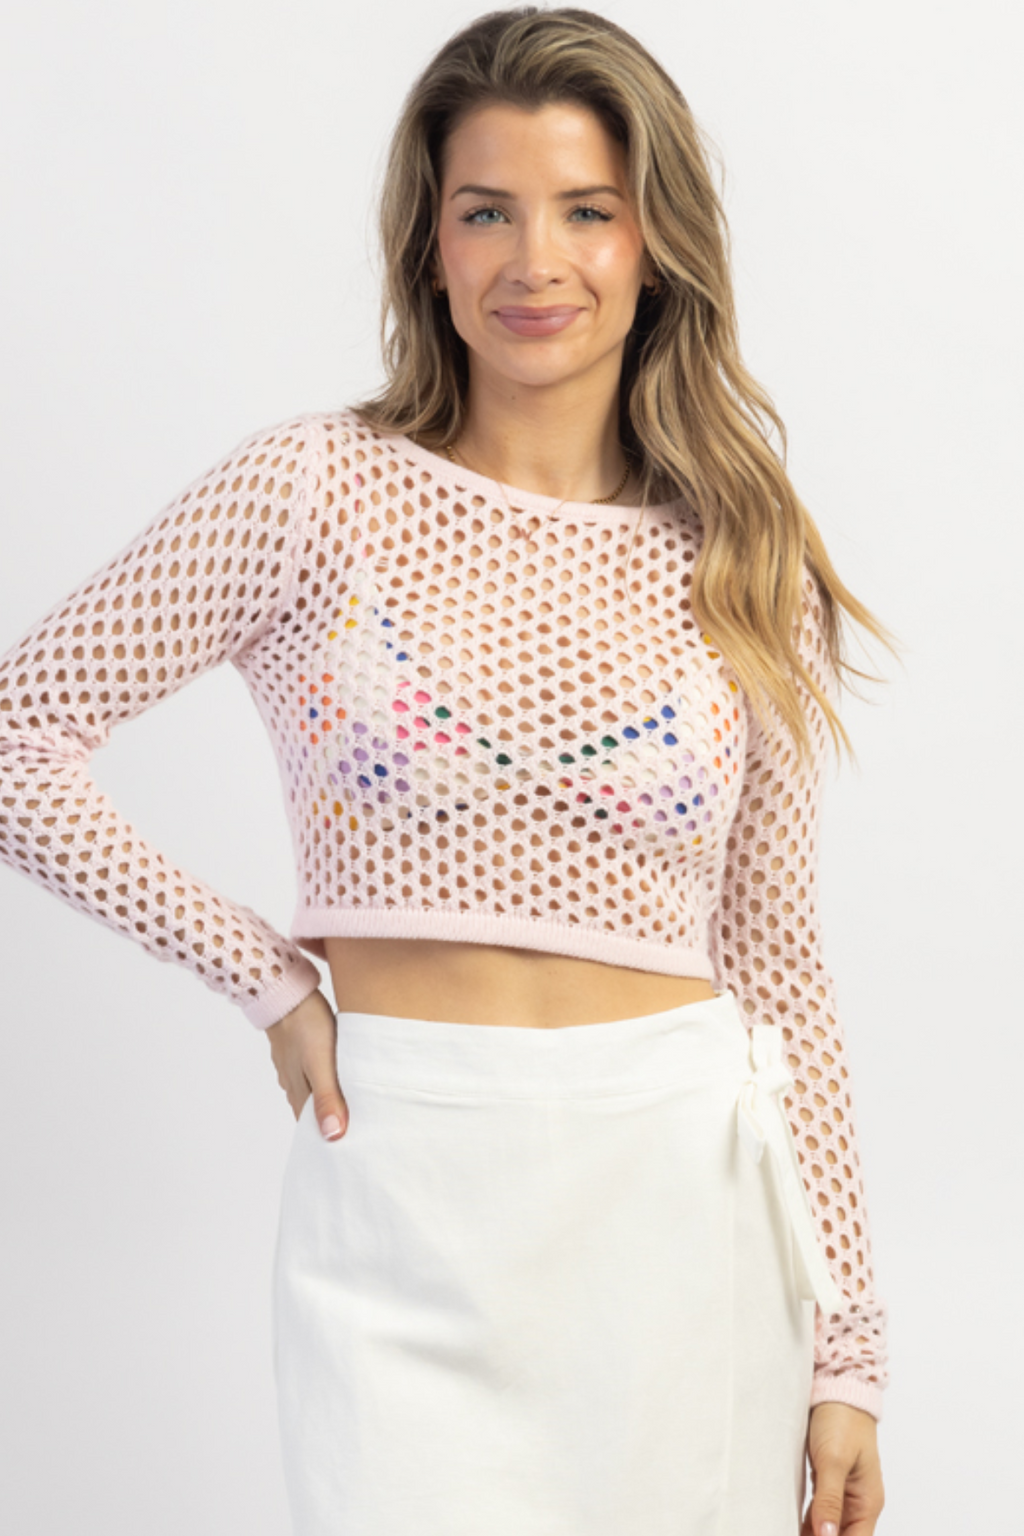 White Crochet Crop Top Lace Up Front Or Back Short Sleeves Tassel Ties –  Made4Walkin